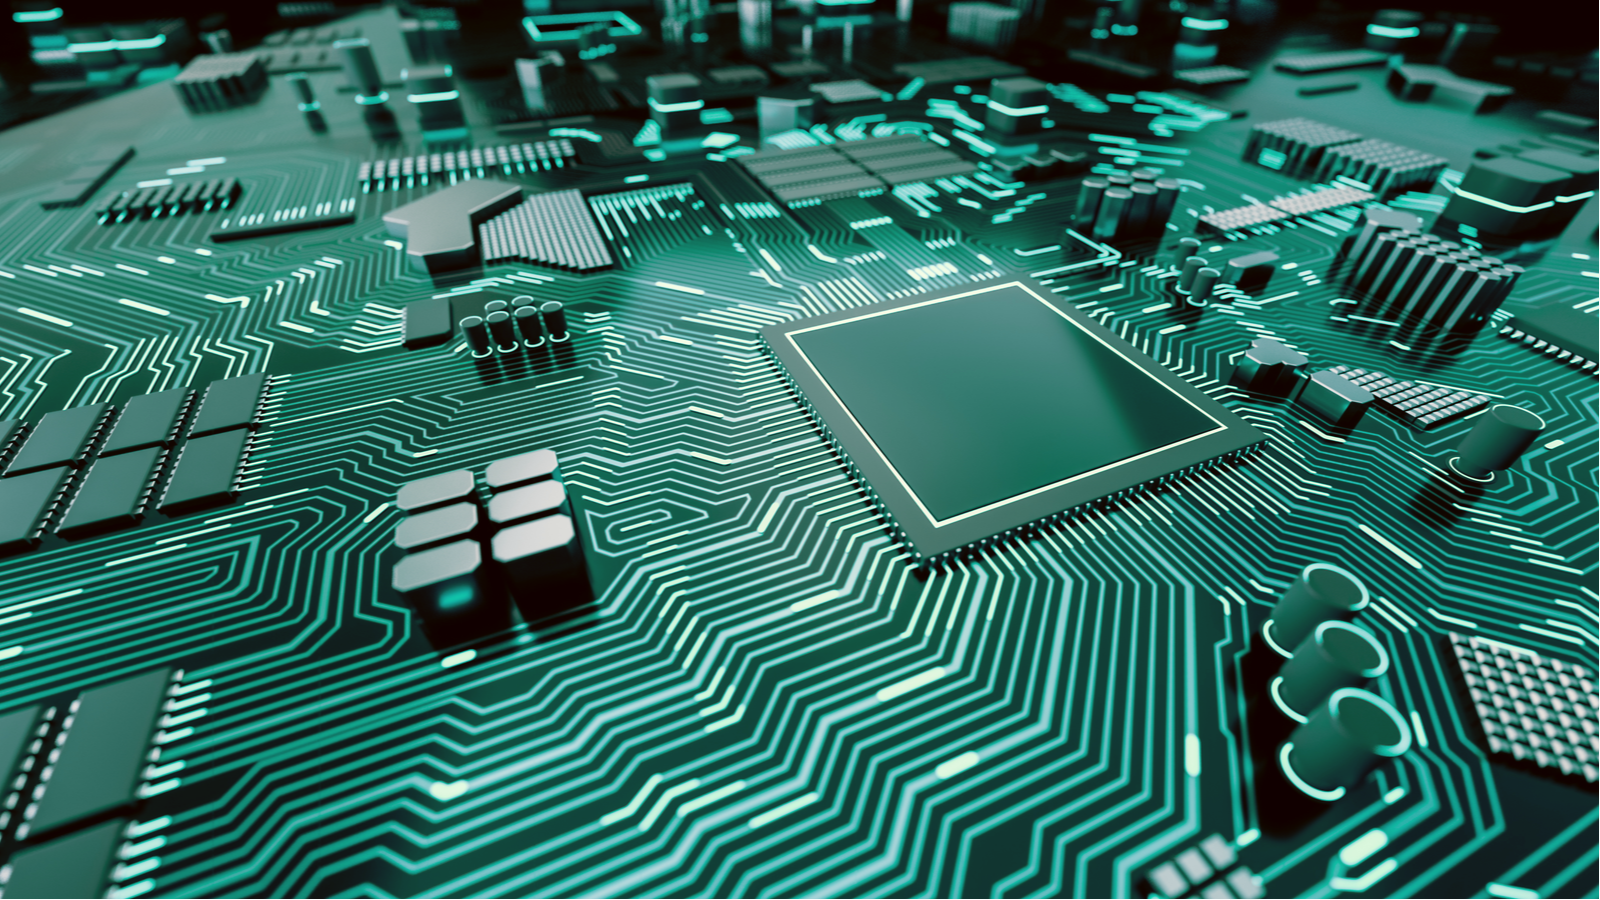 An image of a motherboard and computer chip representing chip stocks.